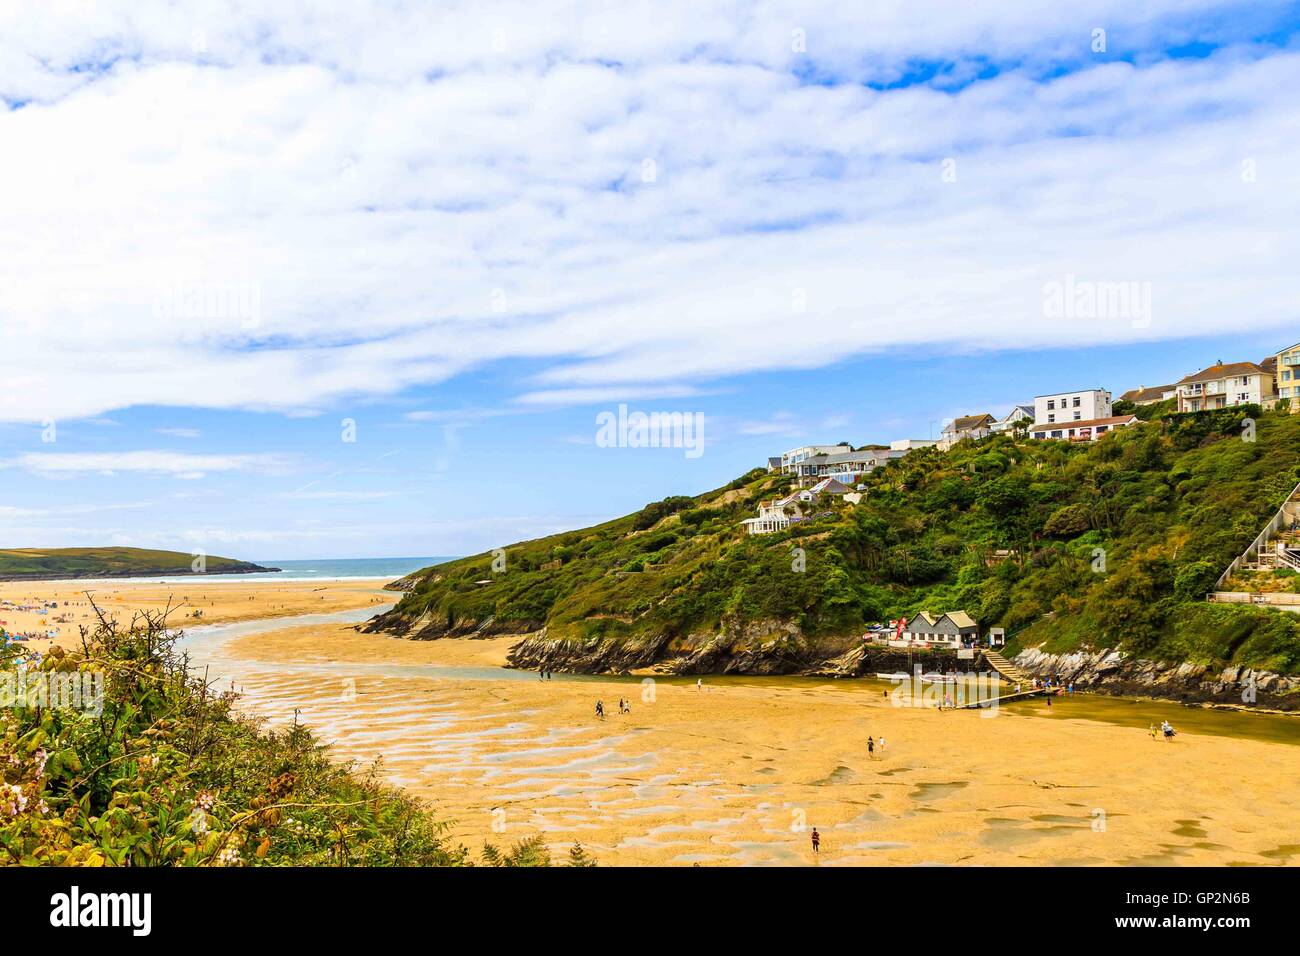 A view of the River Gannel estuary and beach near Newquay in Cornwall, England, UK Stock Photo